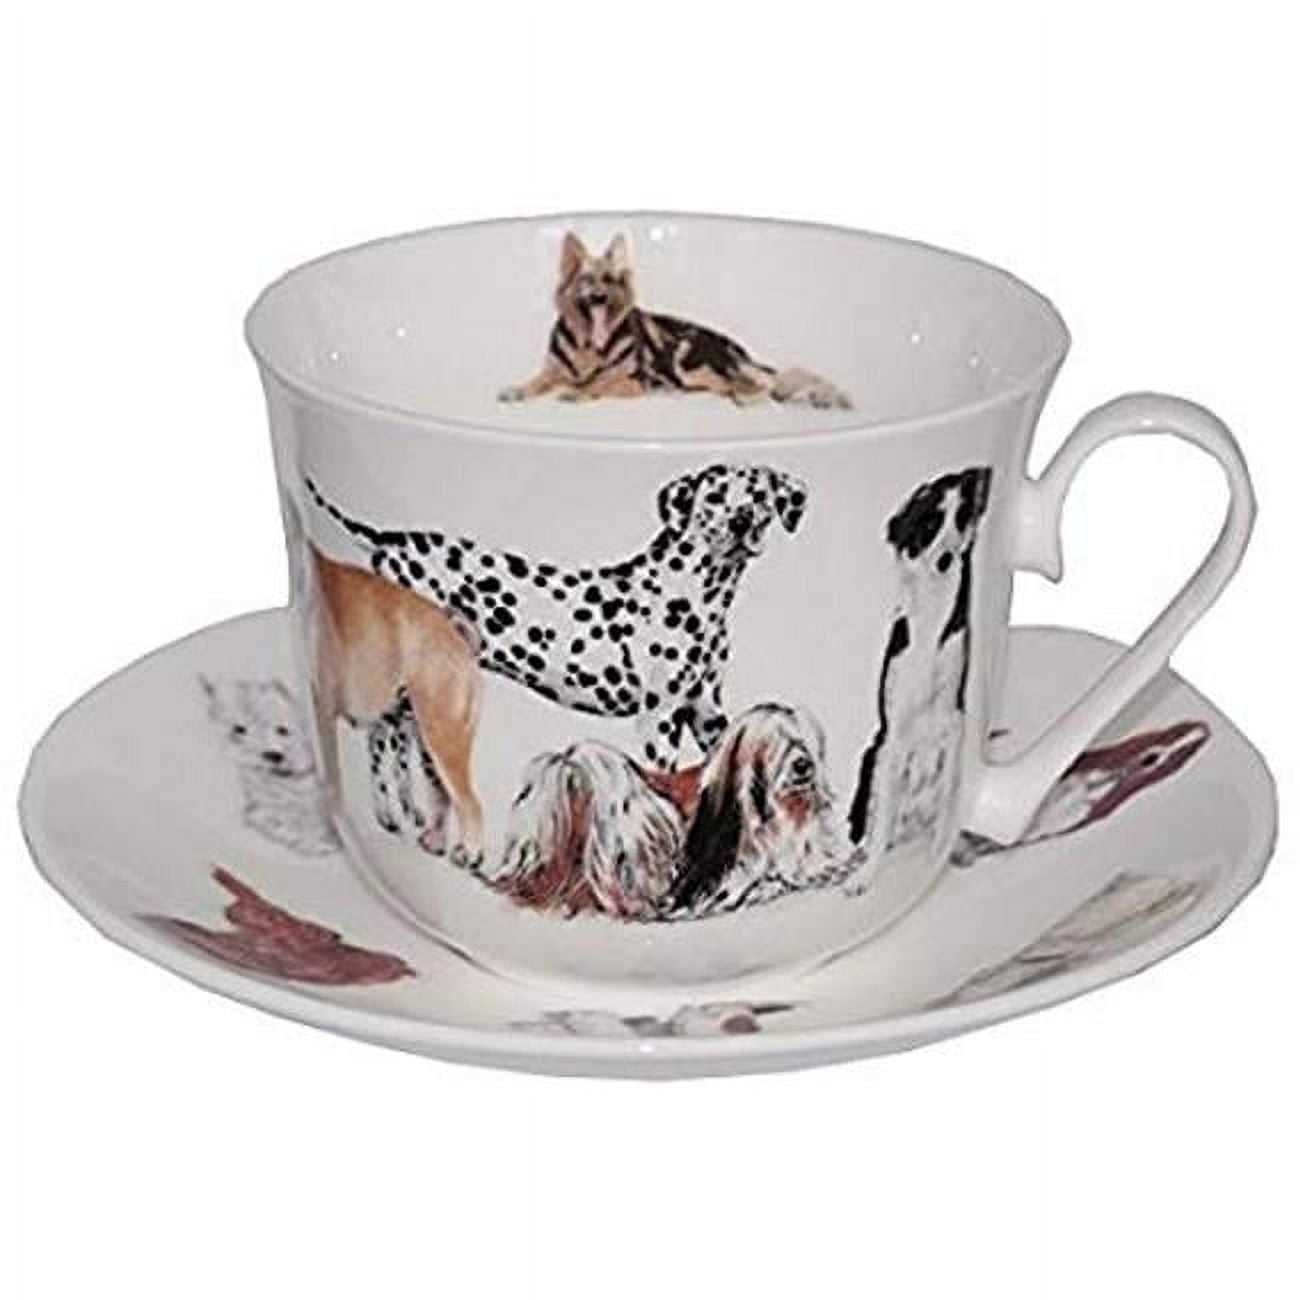 Er2832 105 Mm Dogs Galore Breakfast Cups & Saucers - Set Of 2